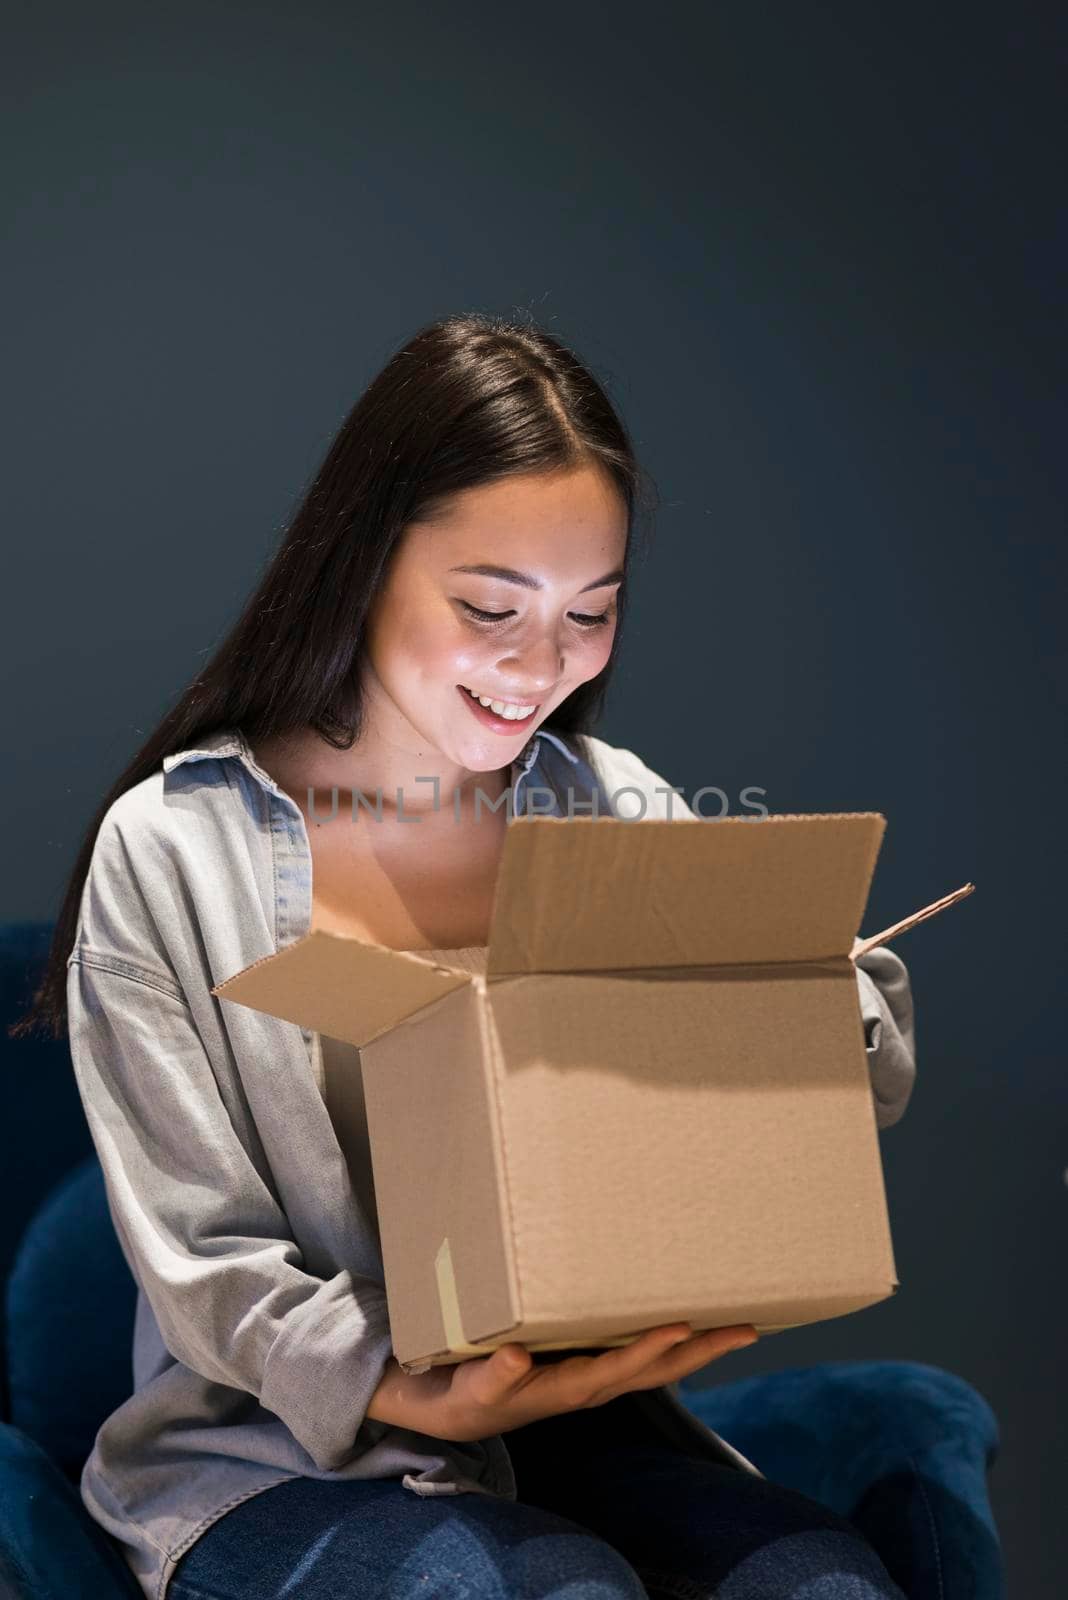 woman looking box after ordering online by Zahard